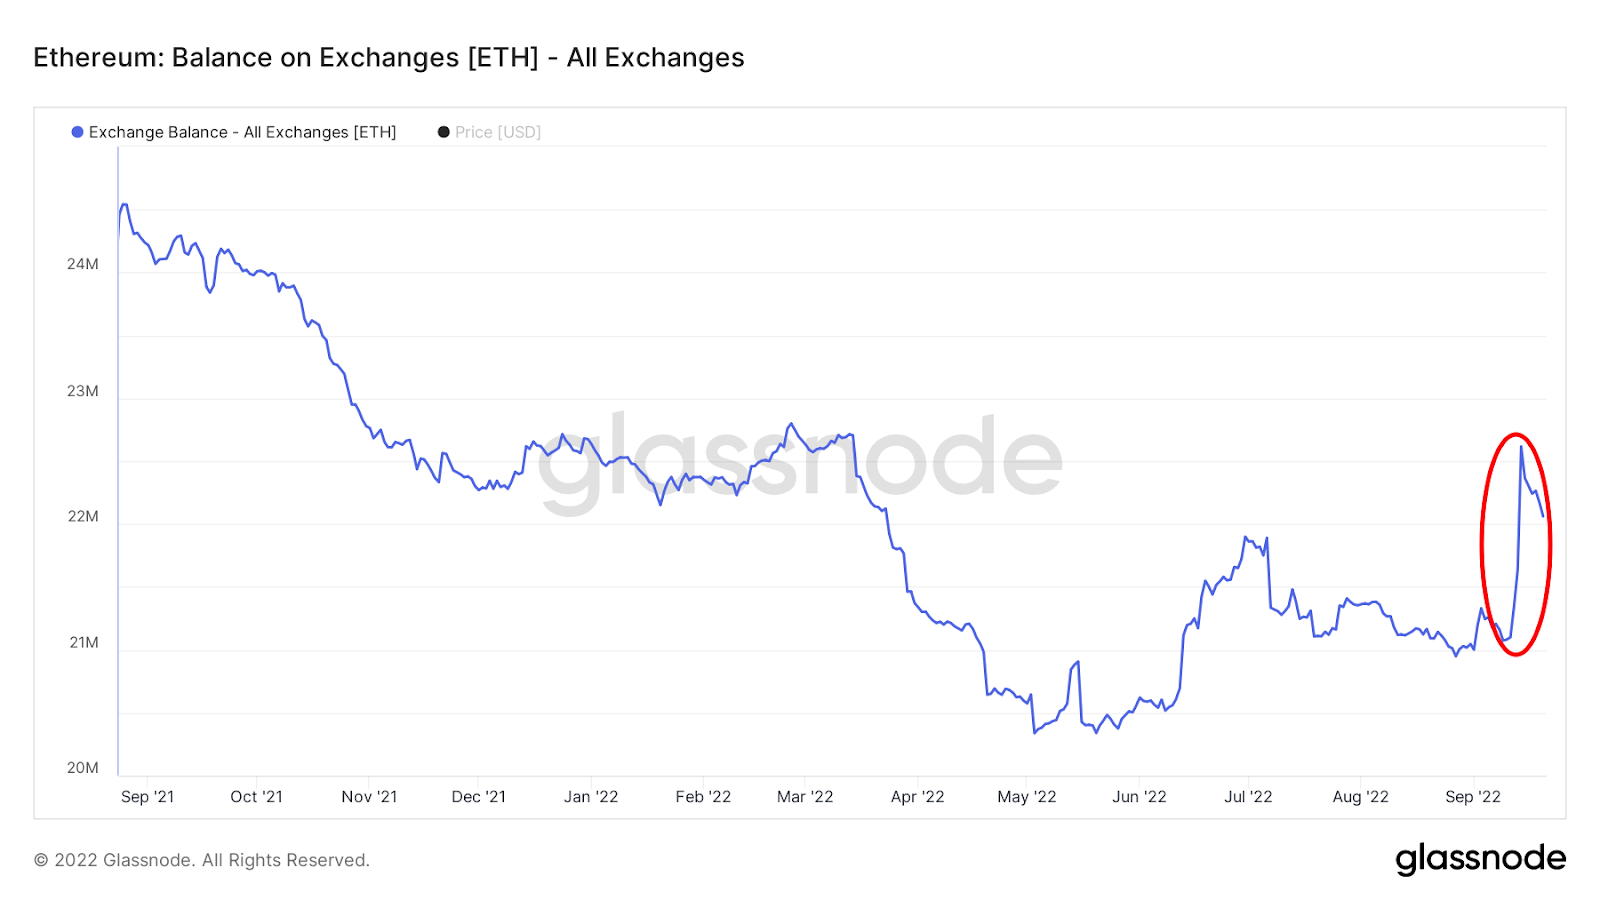 Total ETH balance on crypto exchanges